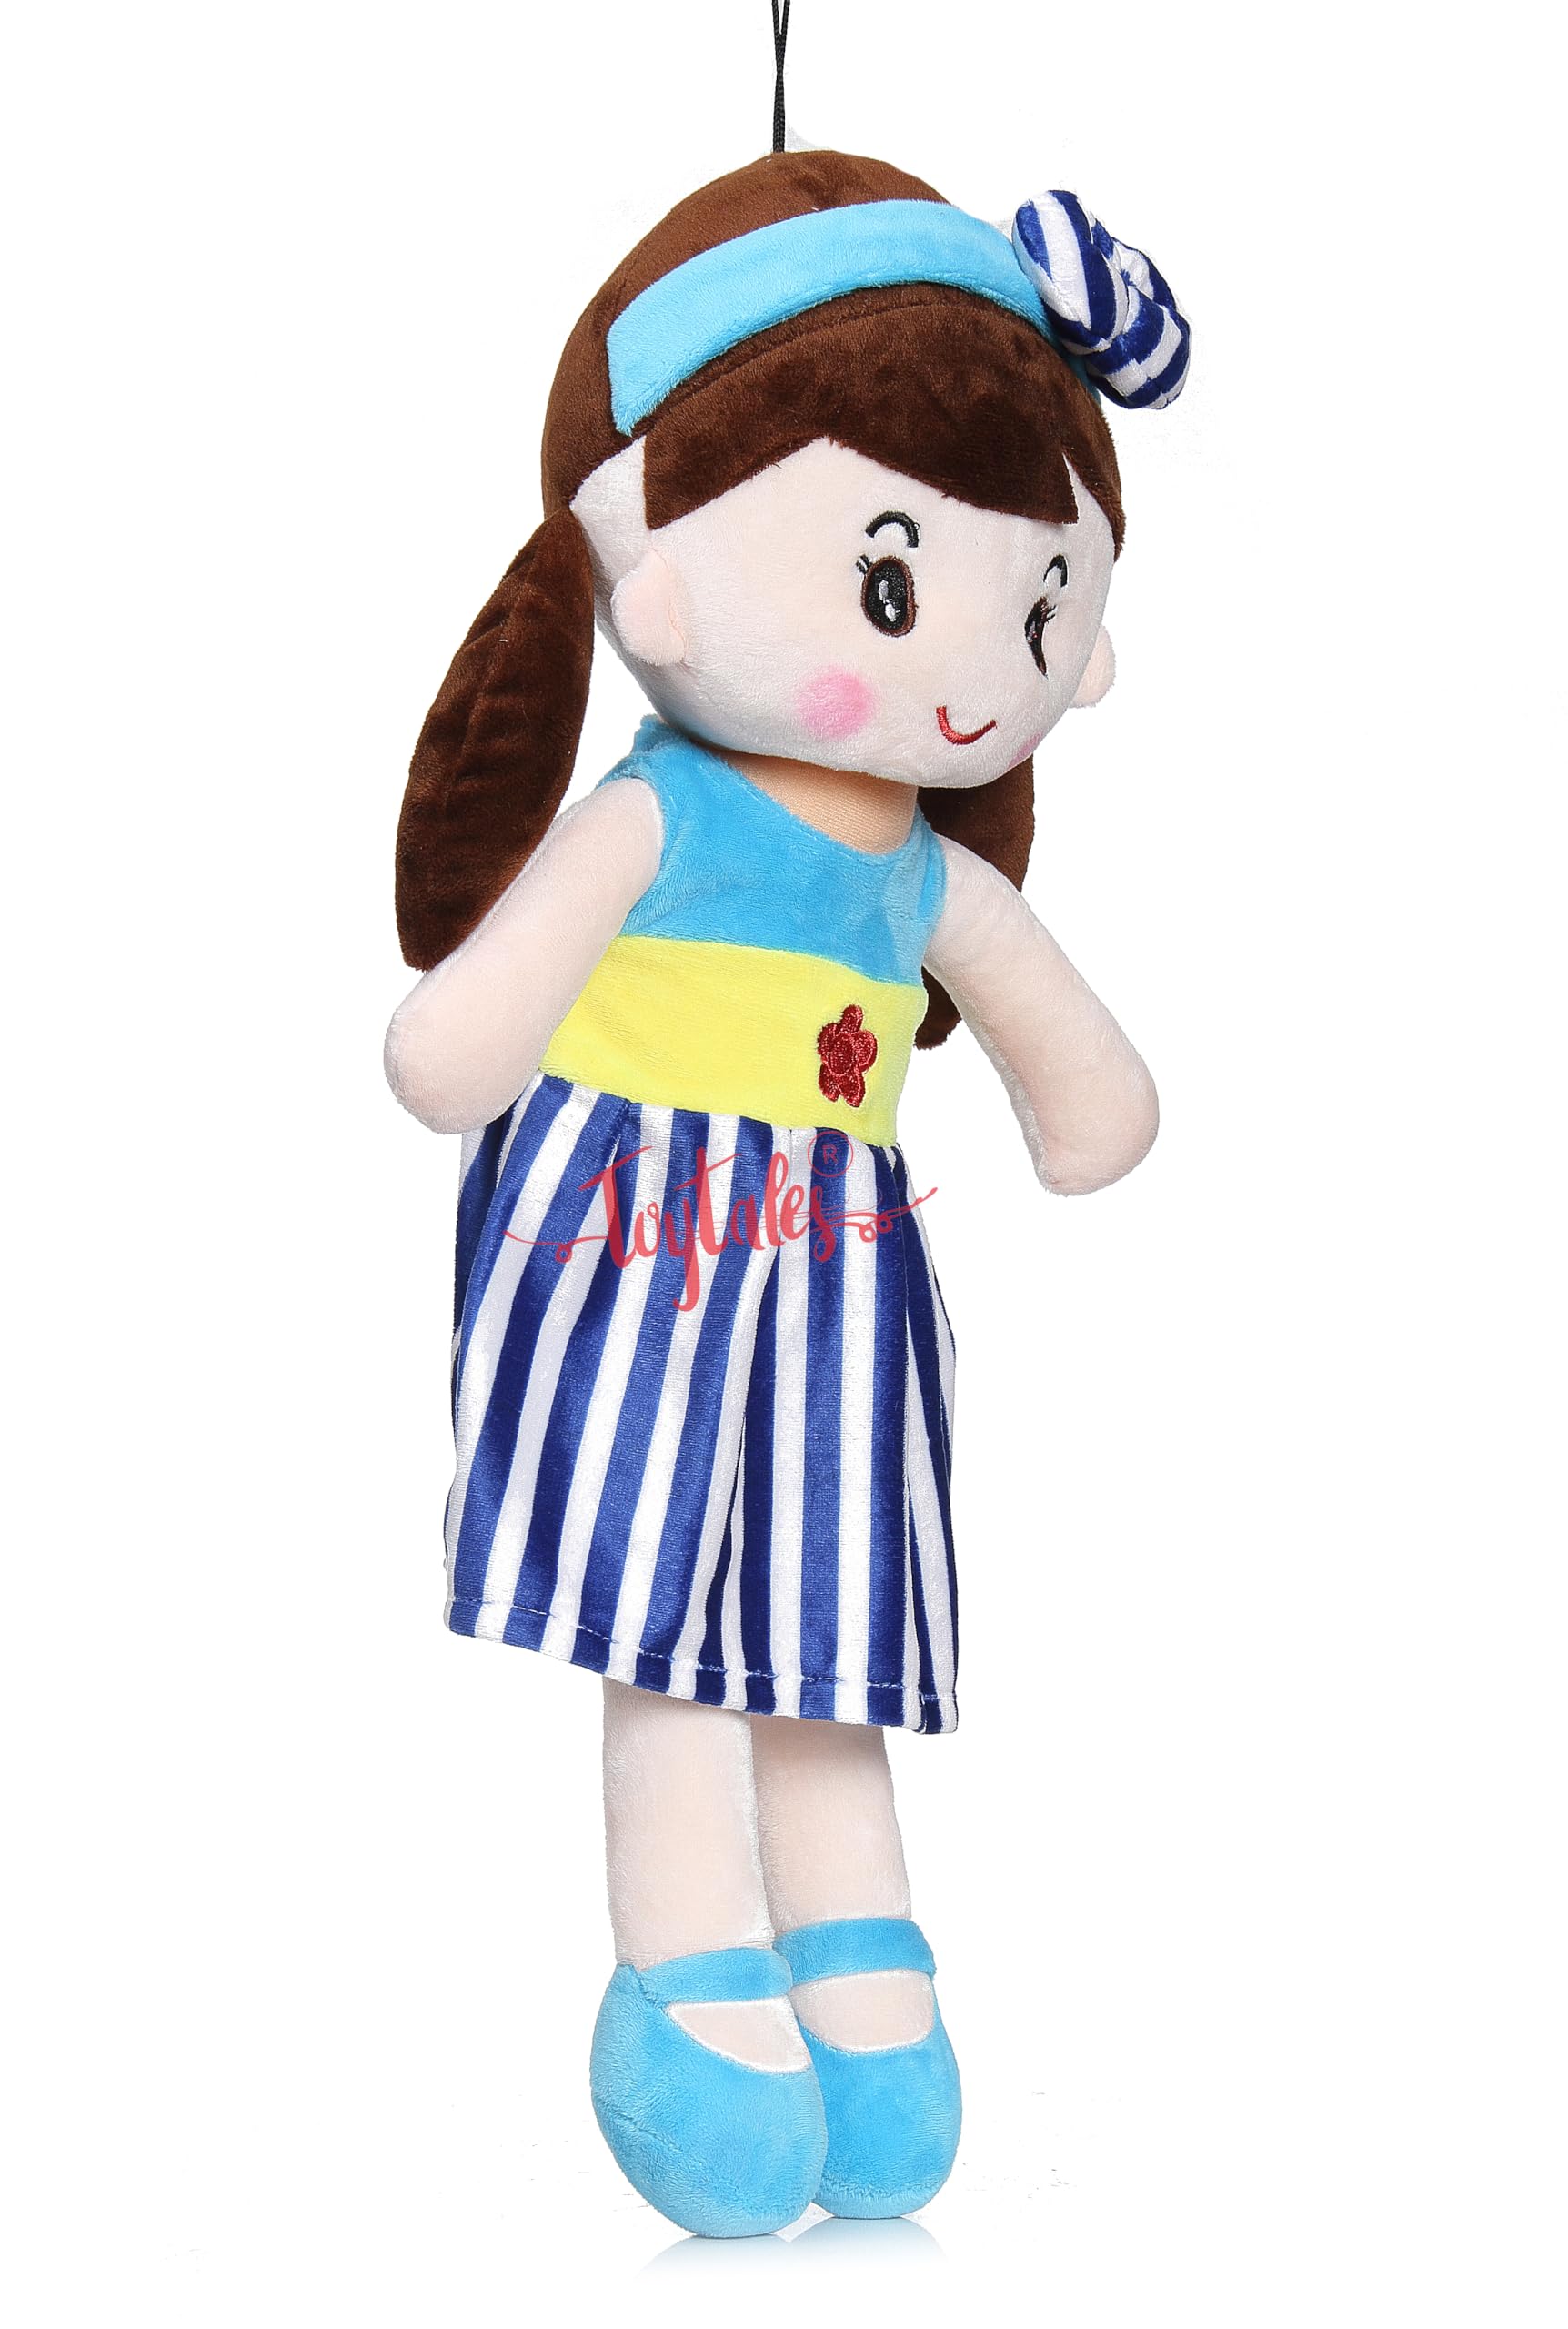 Cute Super Soft Stuffed Doll Medium Size 60cm, Cuddly Squishy Dolls, Plush Toy for Baby Girls, Spark Imaginative Play, Safe & Fun Gift for Kids, Perfect for Playtime & Cuddling (Blue)